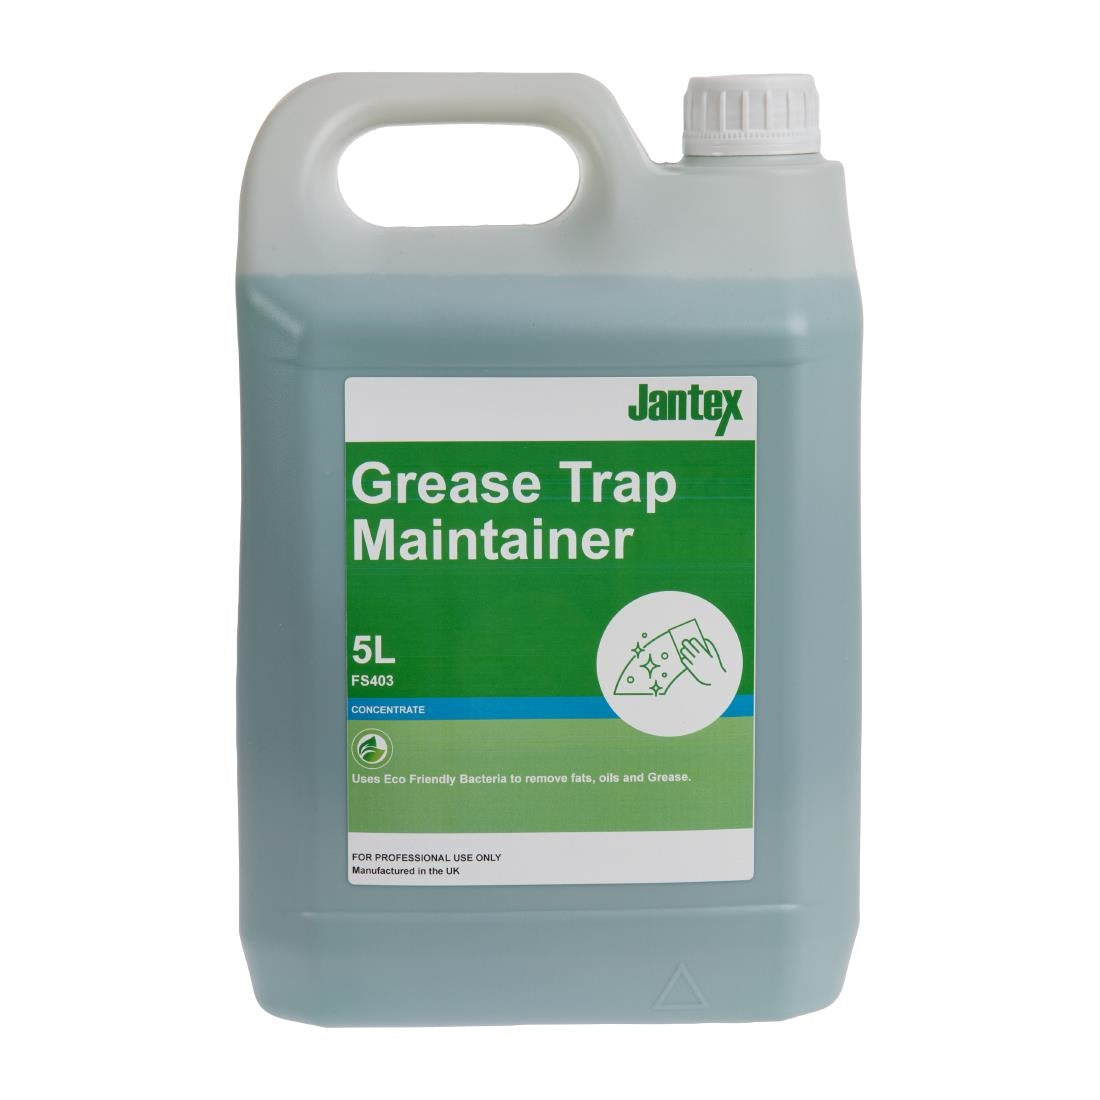 FS403 Jantex Green Grease Trap Maintainer Concentrate 5Ltr JD Catering Equipment Solutions Ltd